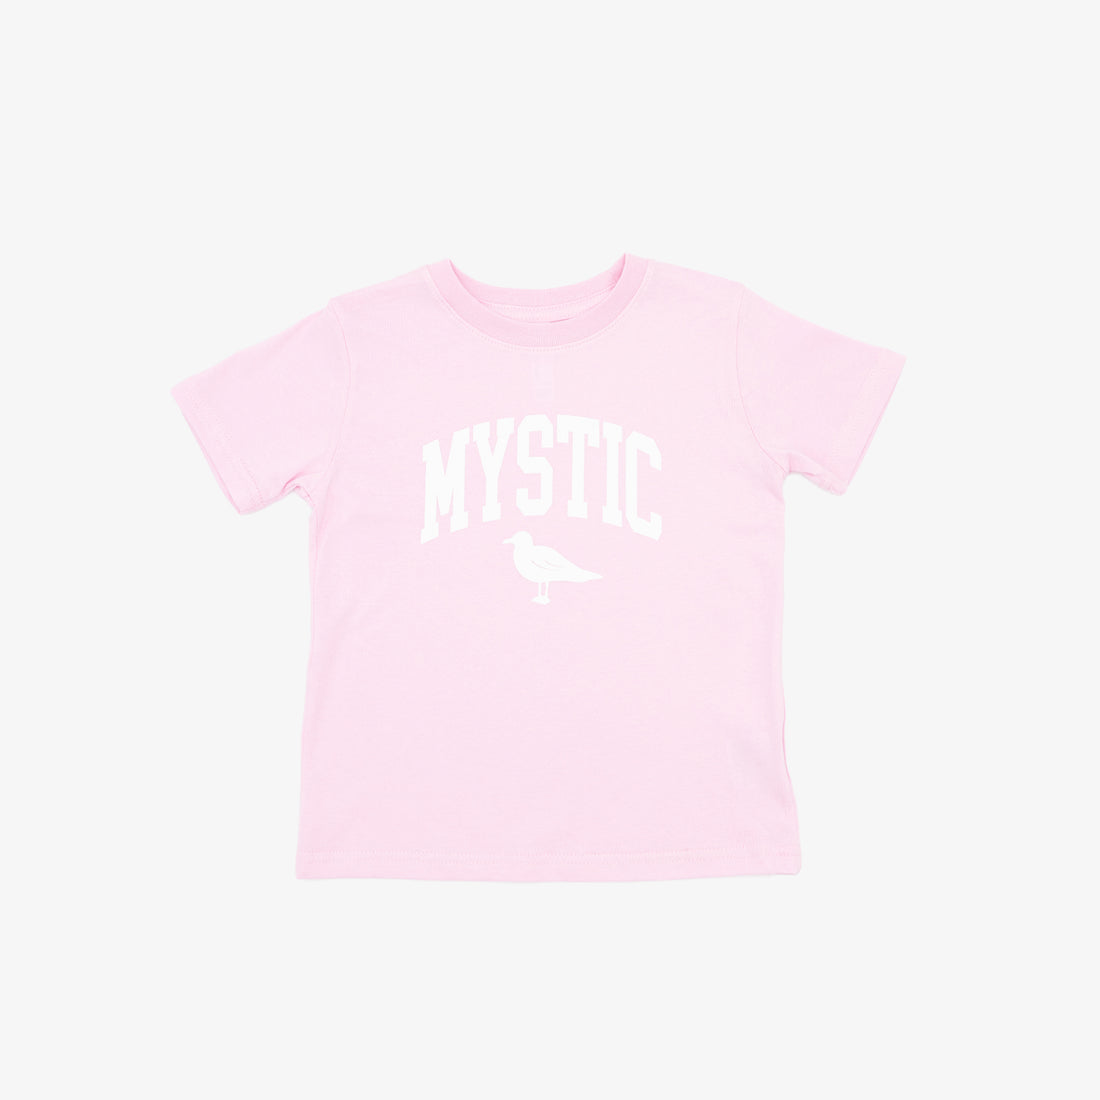 Just – Just Brand from Apparel Kids Mystic & Mystic Youth